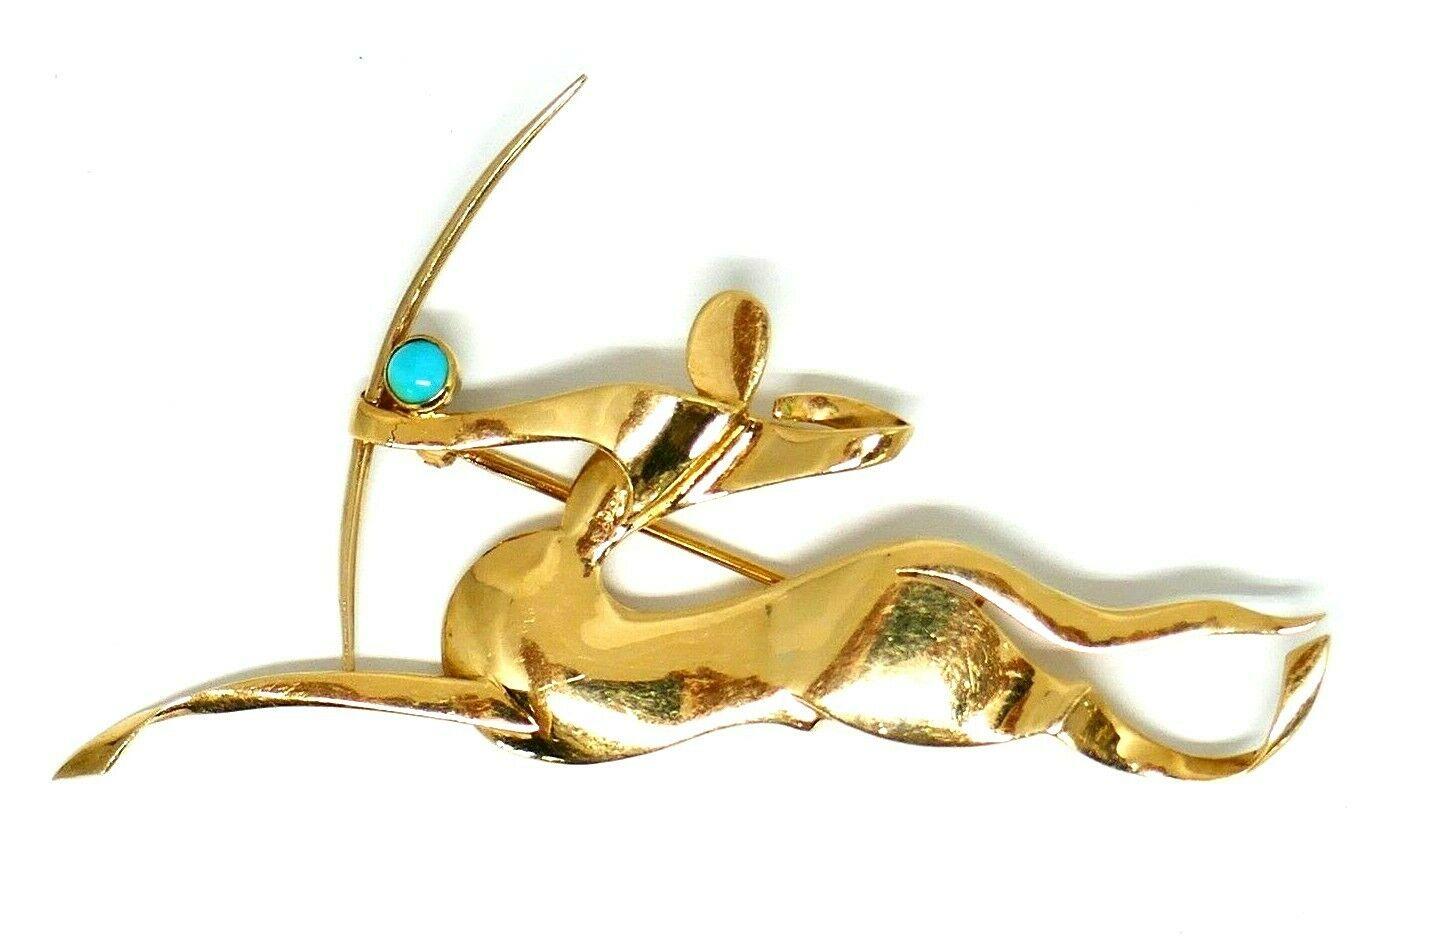 Vintage (c.1970) astrological piece by Trabert & Hoeffer Mauboussin, 14k yellow gold Sagittarius brooch with a turquoise accent. 
Stamped with the Trabert & Hoeffer Mauboussin maker's mark and a hallmark for 14k gold. Engraved 